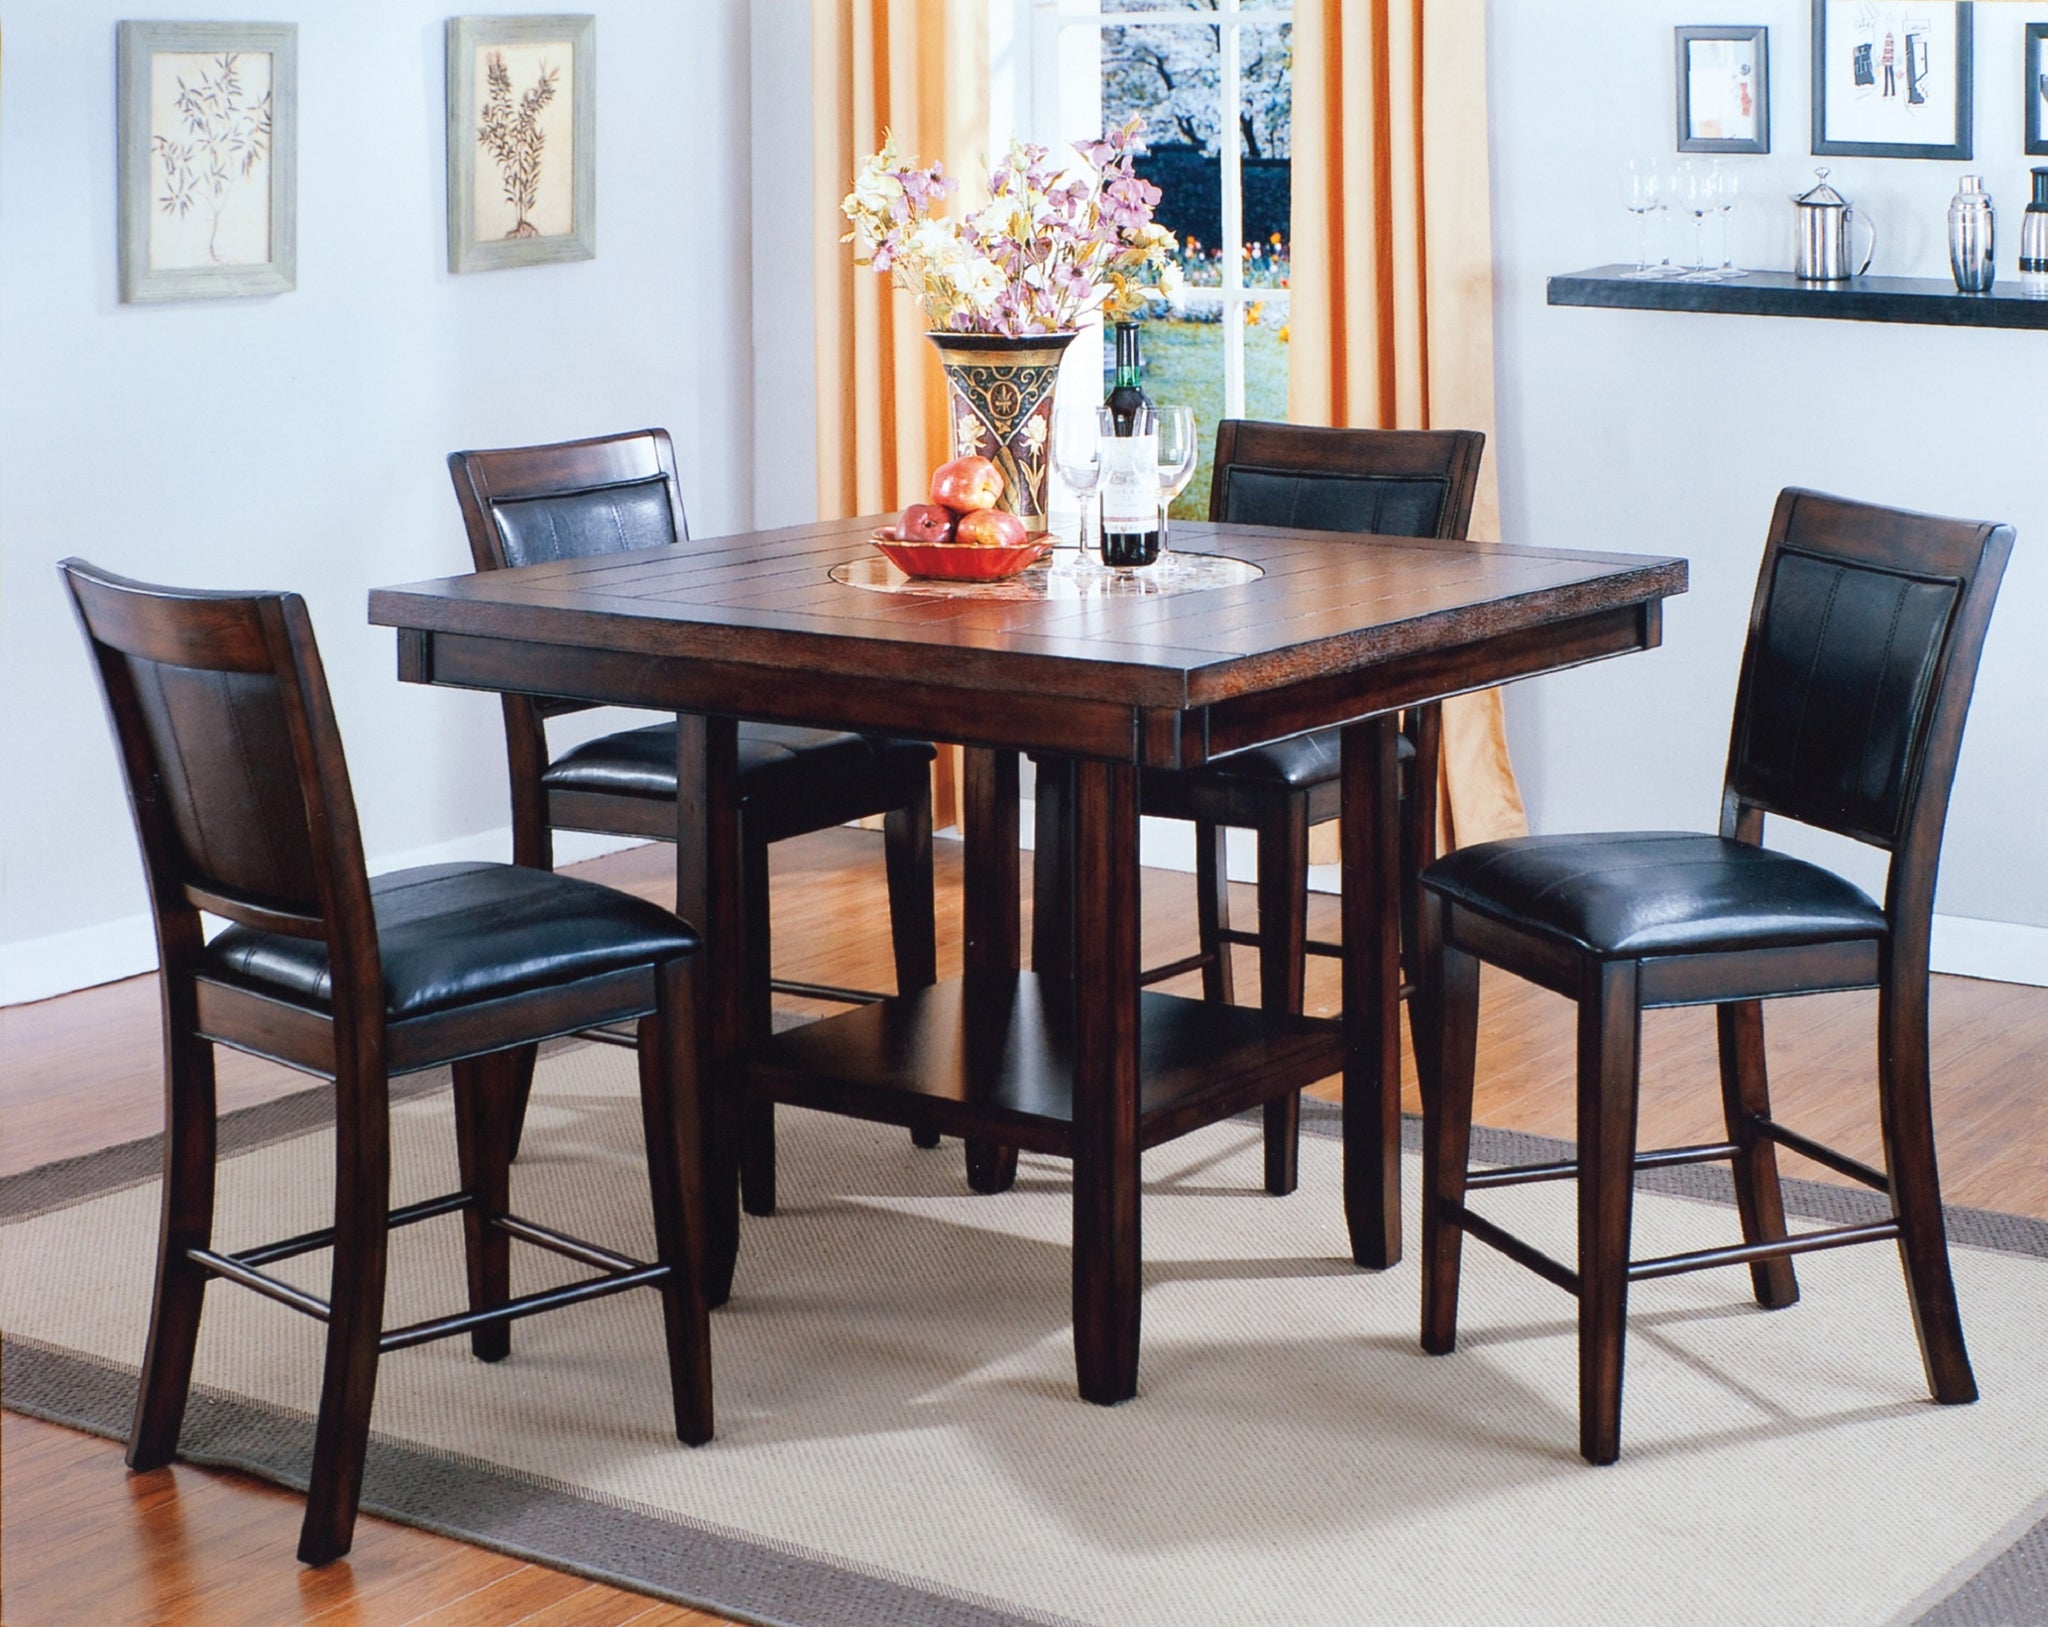 5pc Dining Set Contemporary Farmhouse Style Counter upholstered chair-wood-dark brown-seats